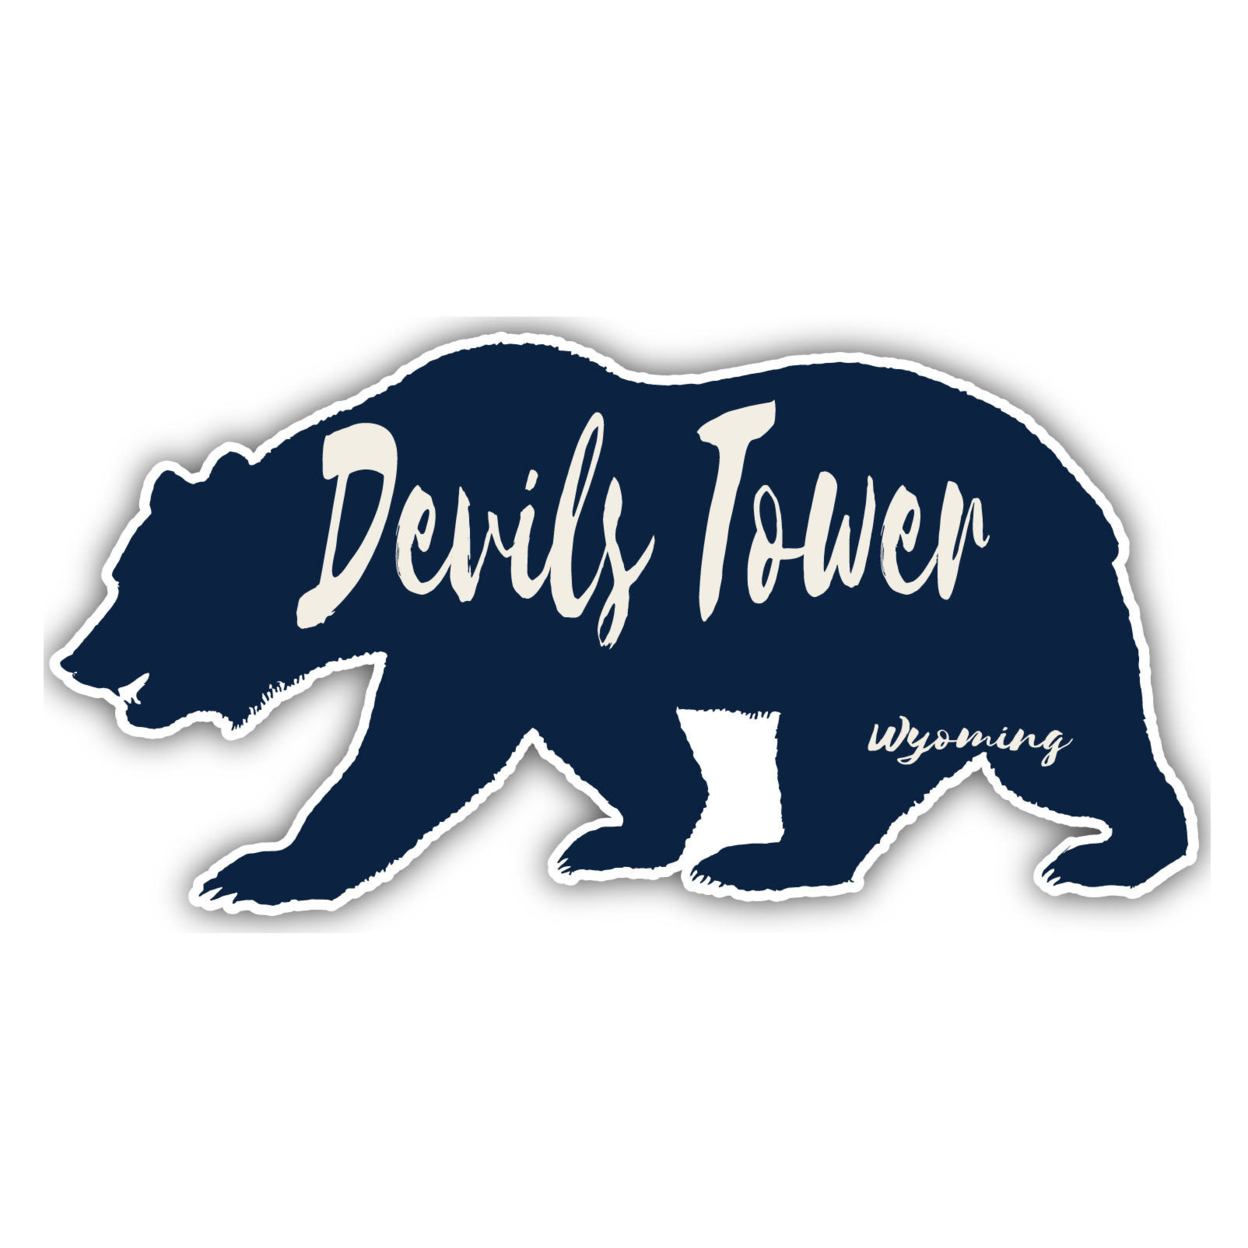 Devils Tower Wyoming Souvenir Decorative Stickers (Choose Theme And Size) - Single Unit, 8-Inch, Adventures Awaits